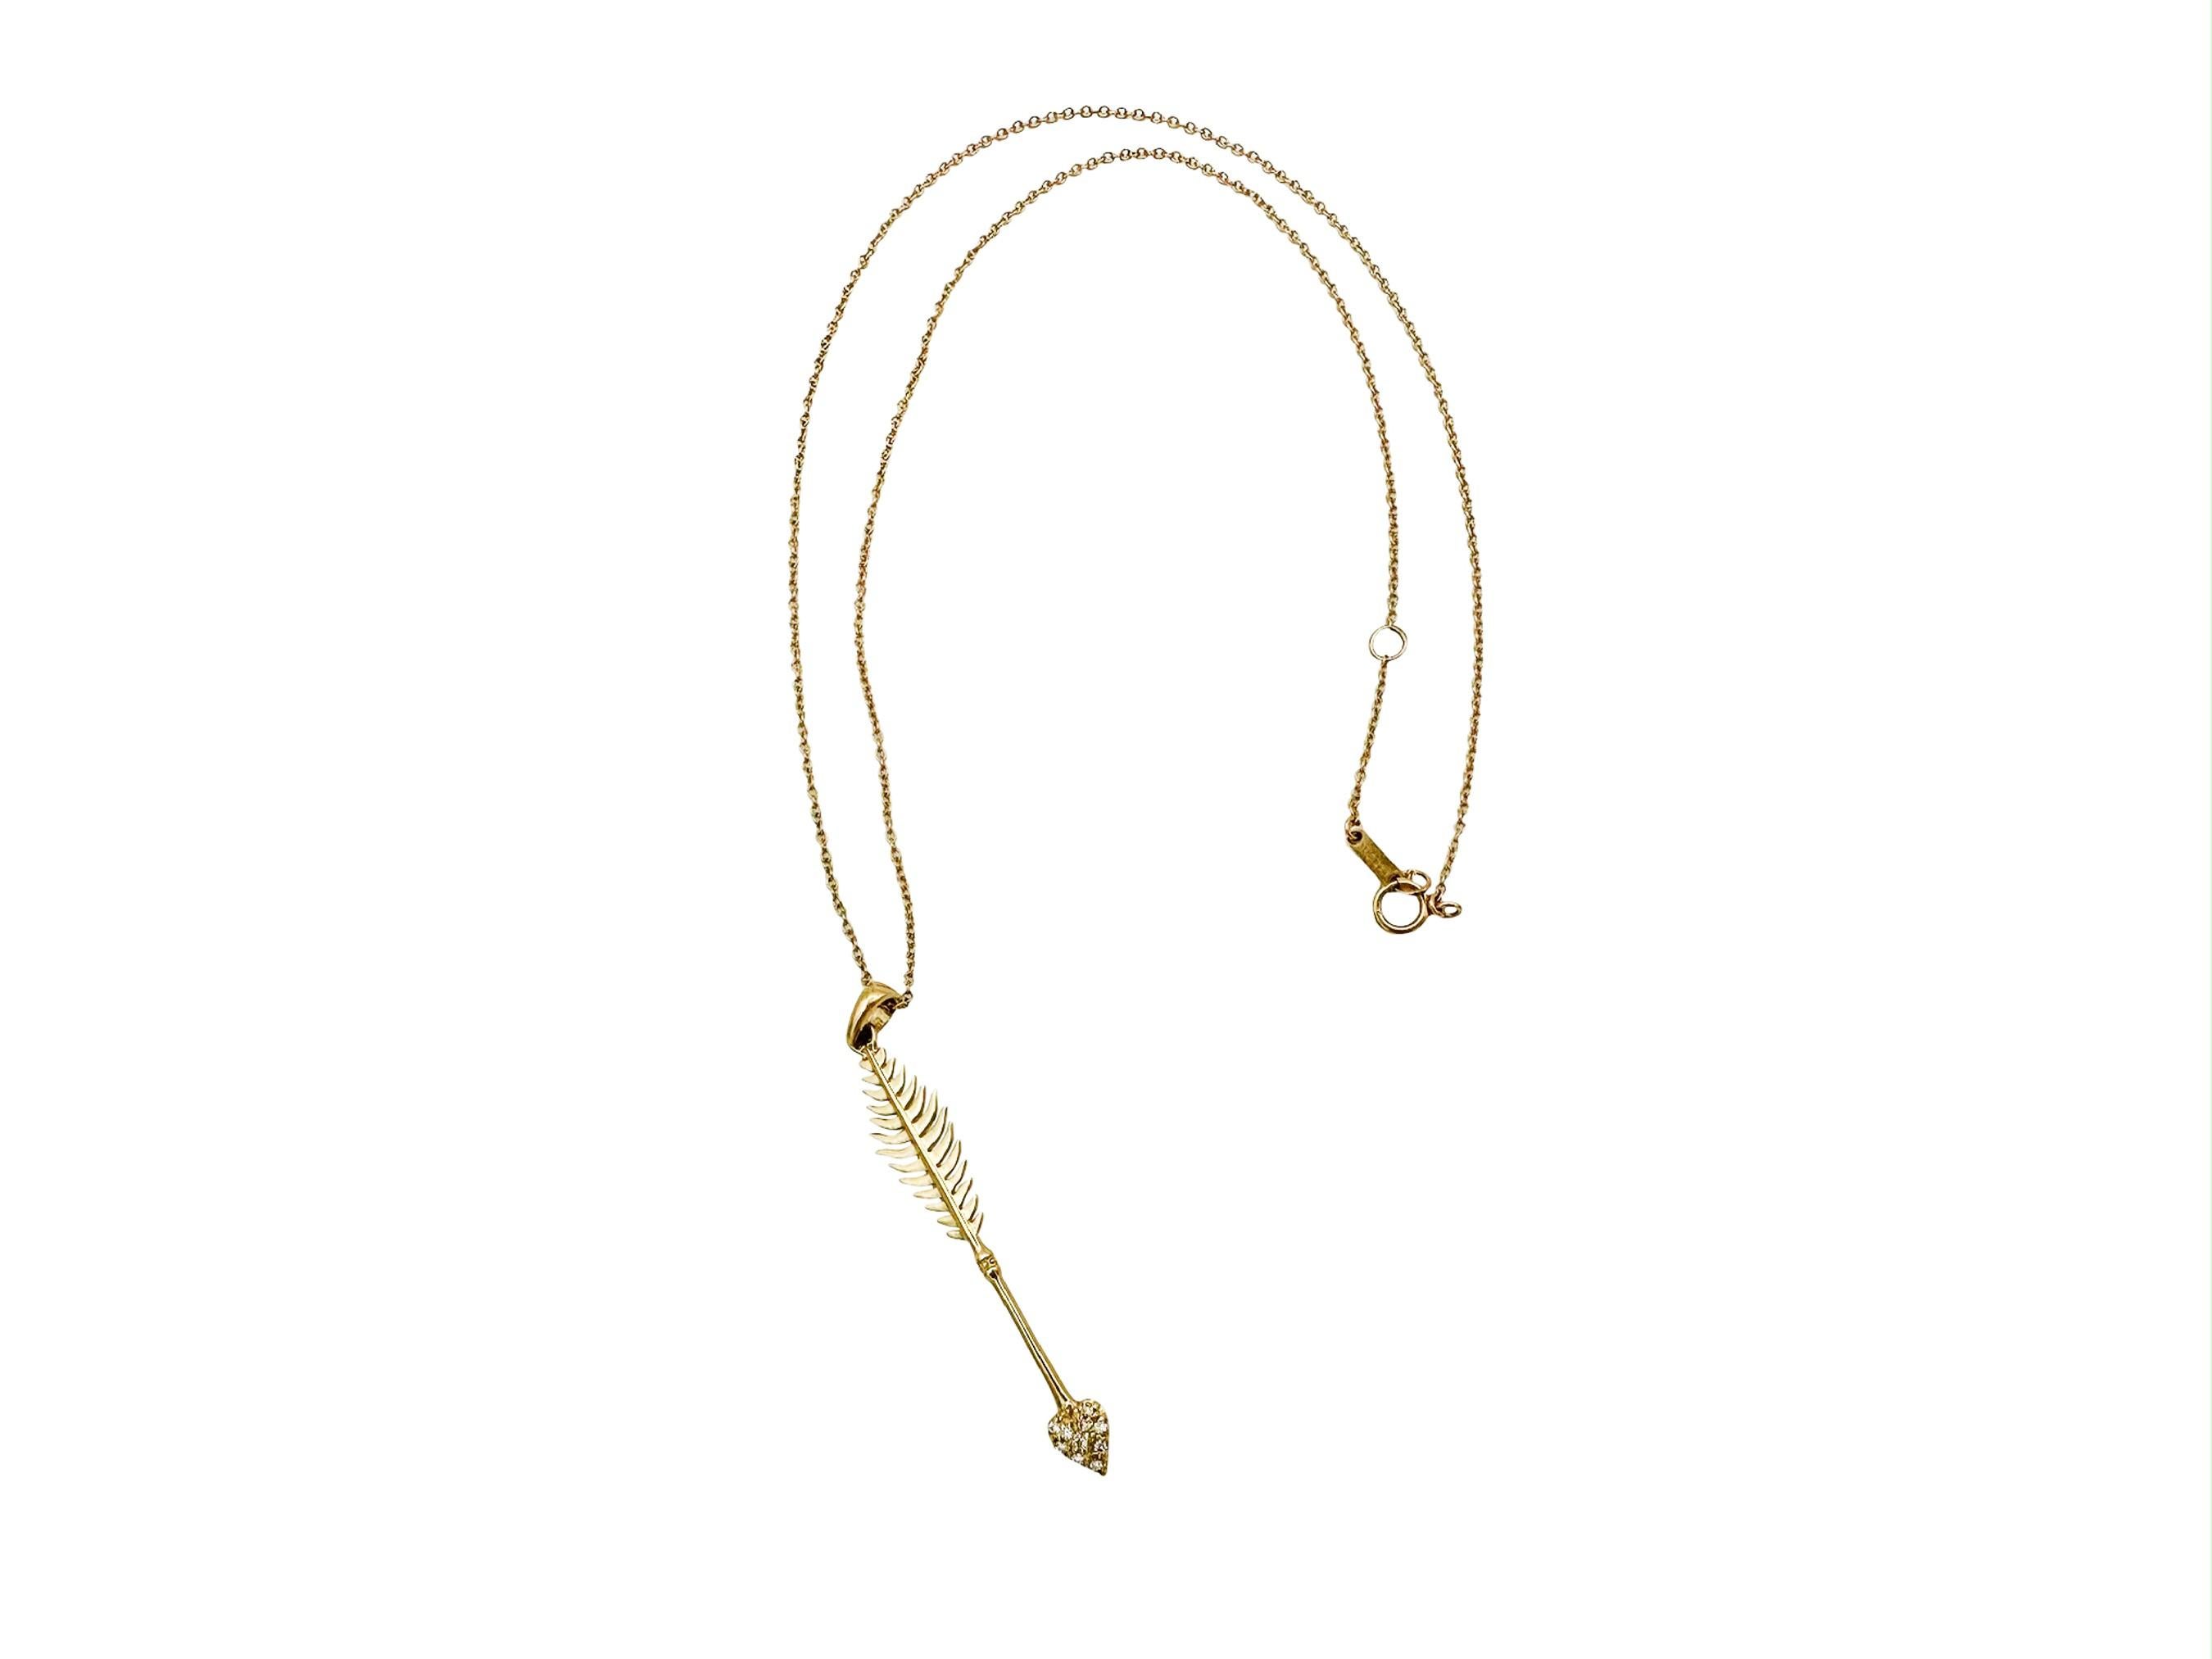 Chic and sweet diamond heart arrow pendant by Mizuki. Sliding along a delicate 14K yellow gold chain, the pendant is finely detailed. The arrow 